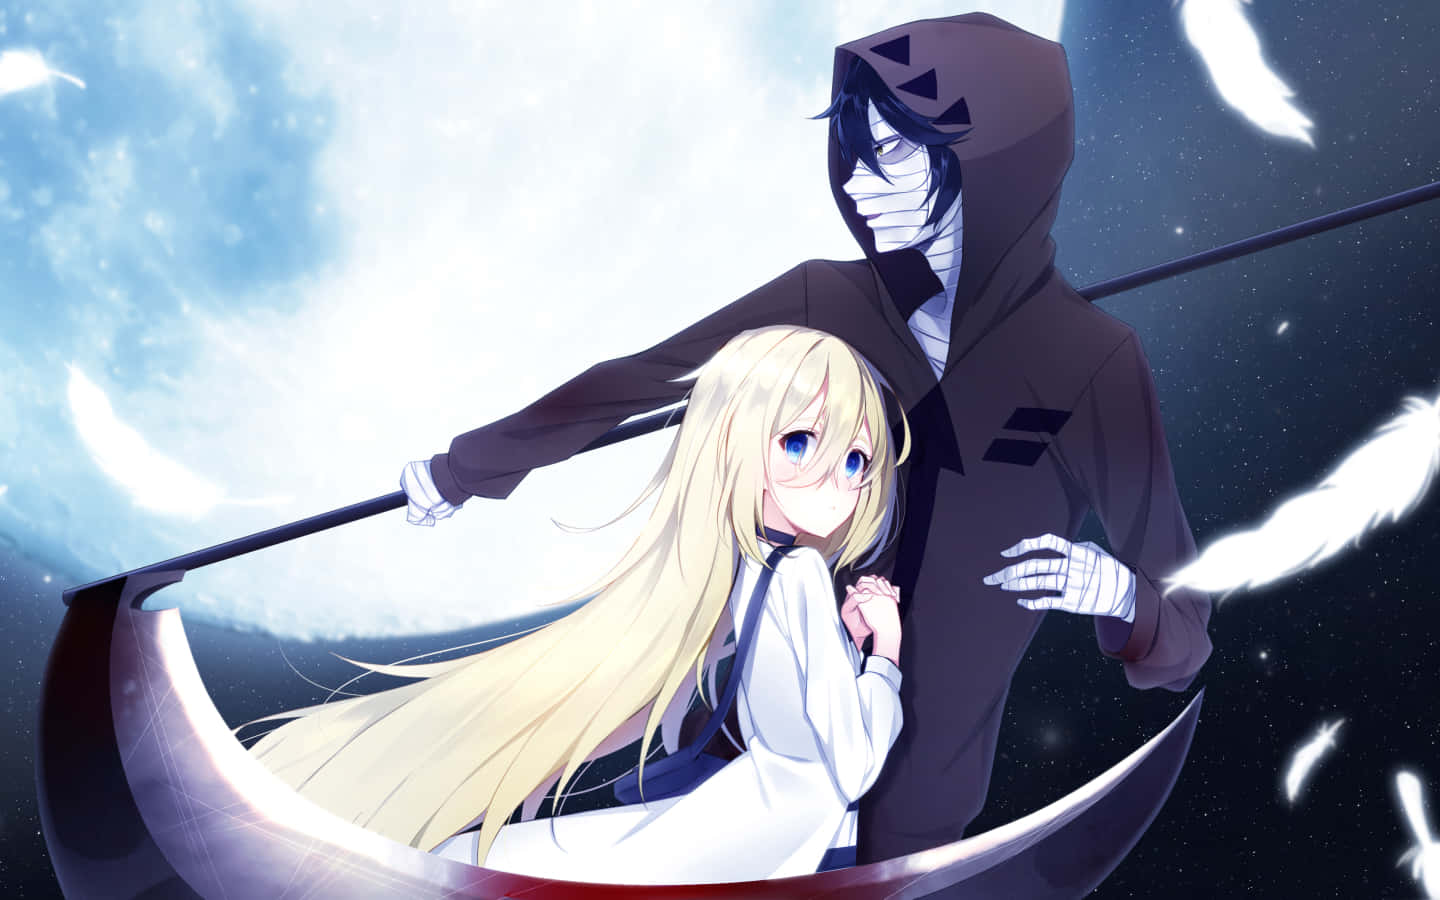 Join Rachel, Zack, and Eddie in the thrilling survival game Angels Of Death